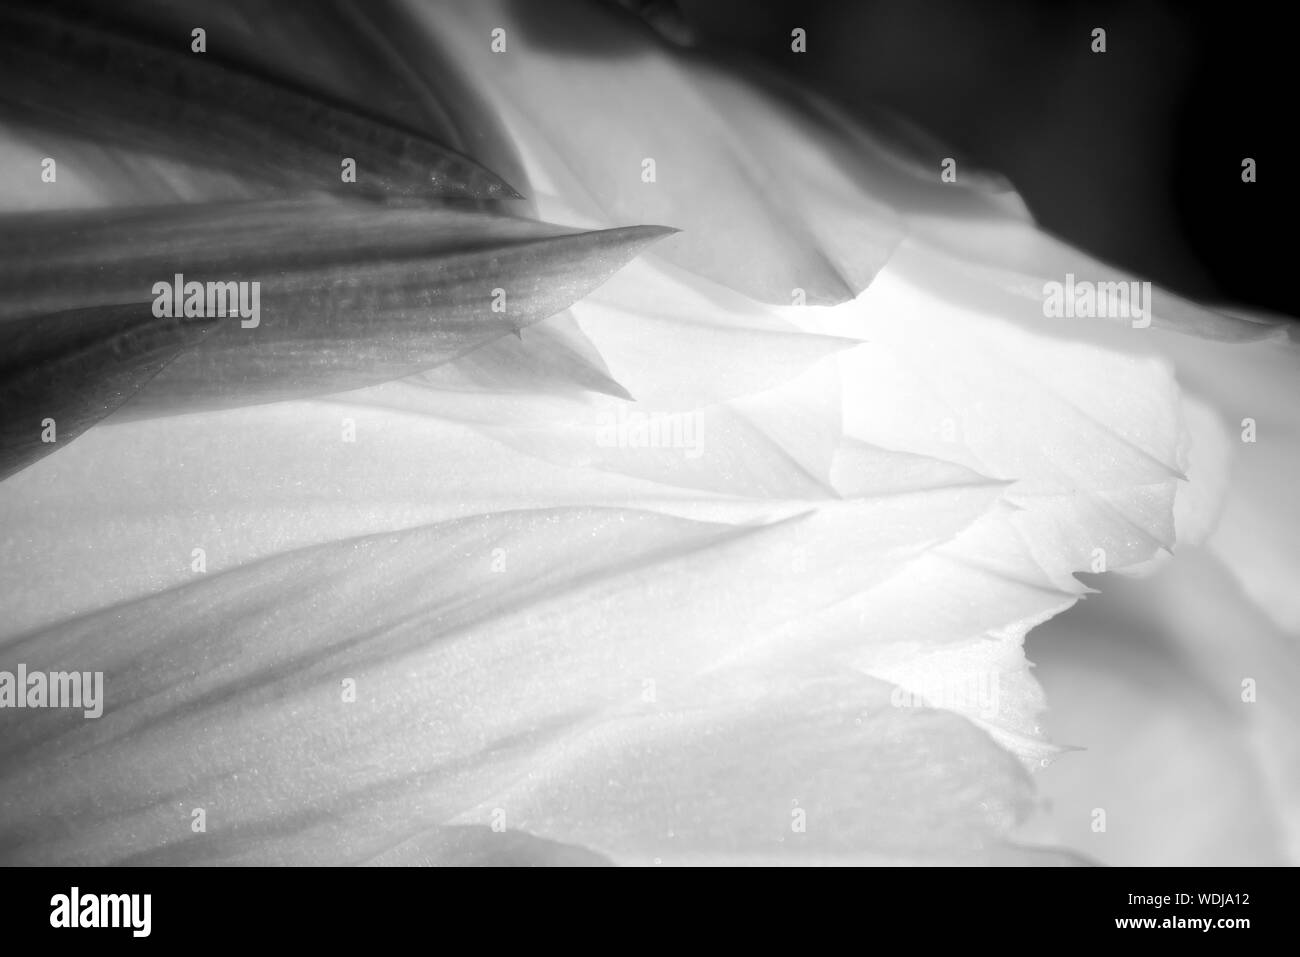 Lush black and white detail of petals in night blooming cactus flower.  Curves and shapes in macro abstract image. Stock Photo